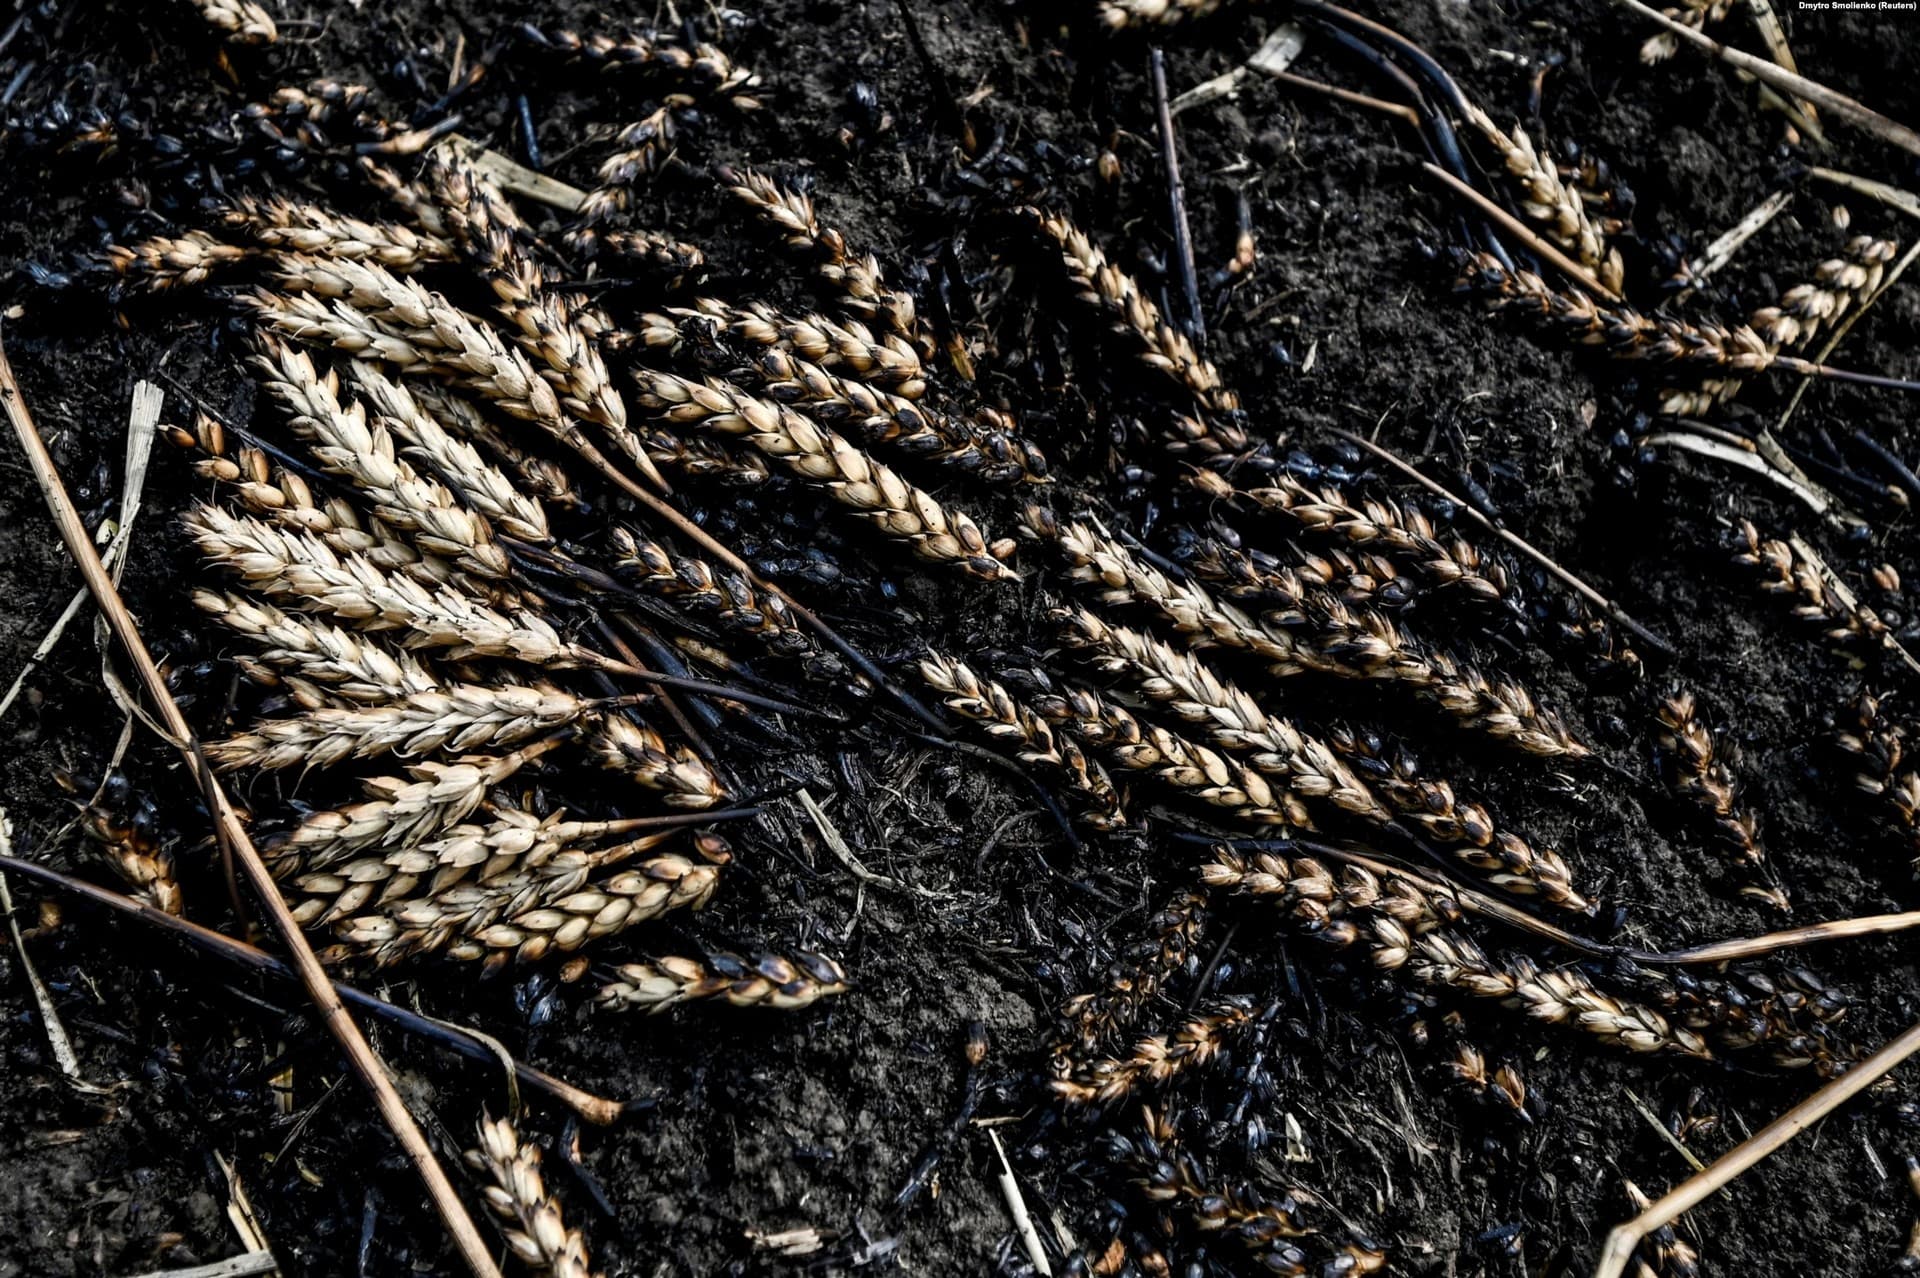 Charred Ukrainian wheat photographed on July 17 on the border between the Zaporizhzhya and Donetsk regions, where fighting is currently under way